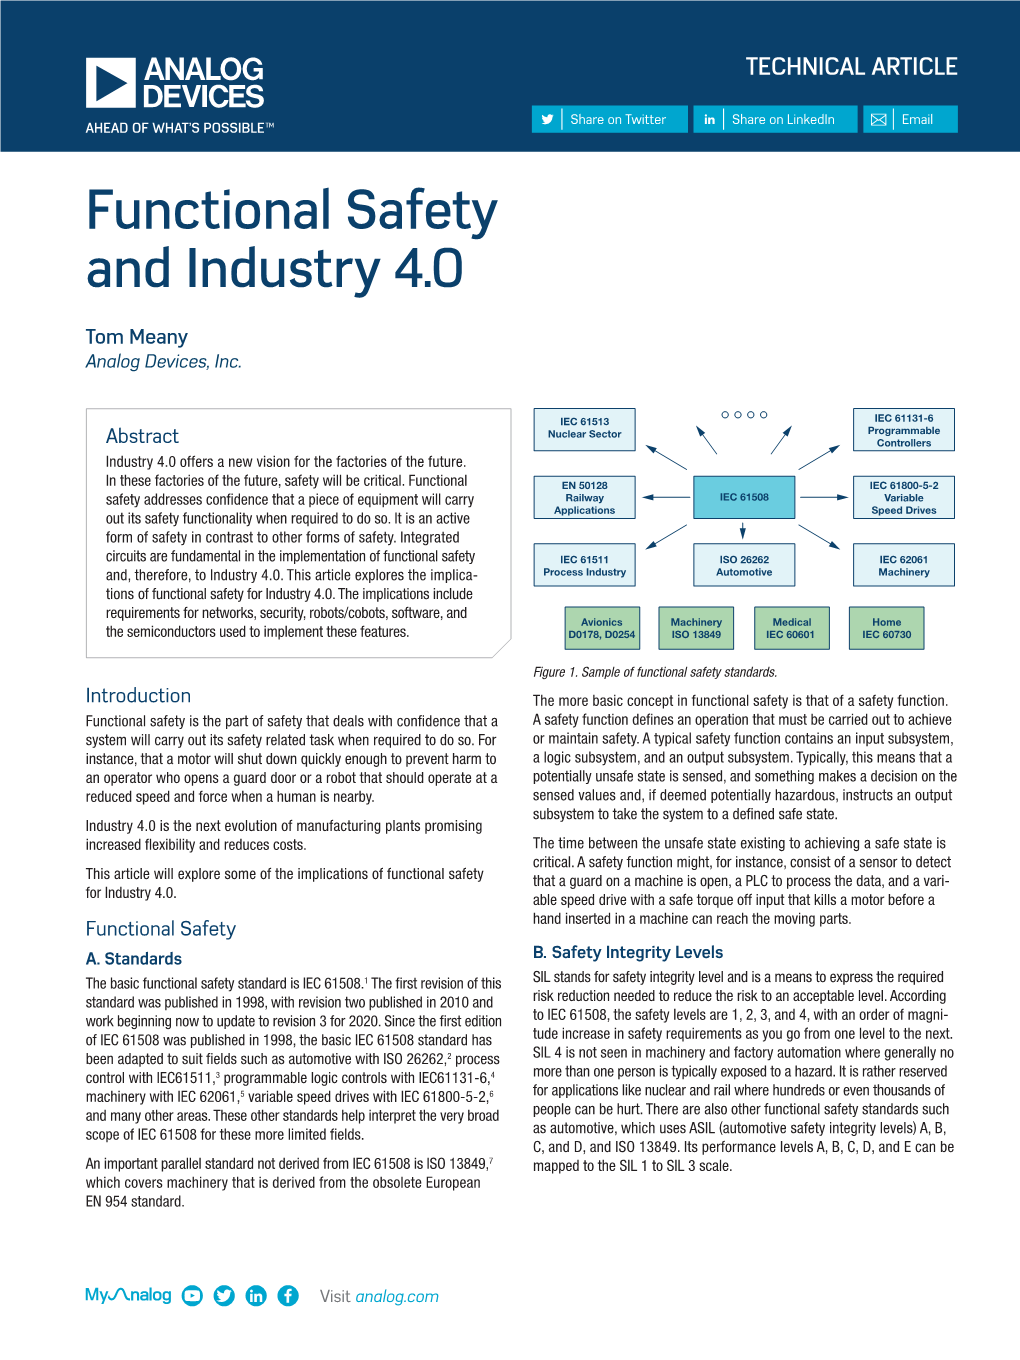 Functional Safety and Industry 4.0